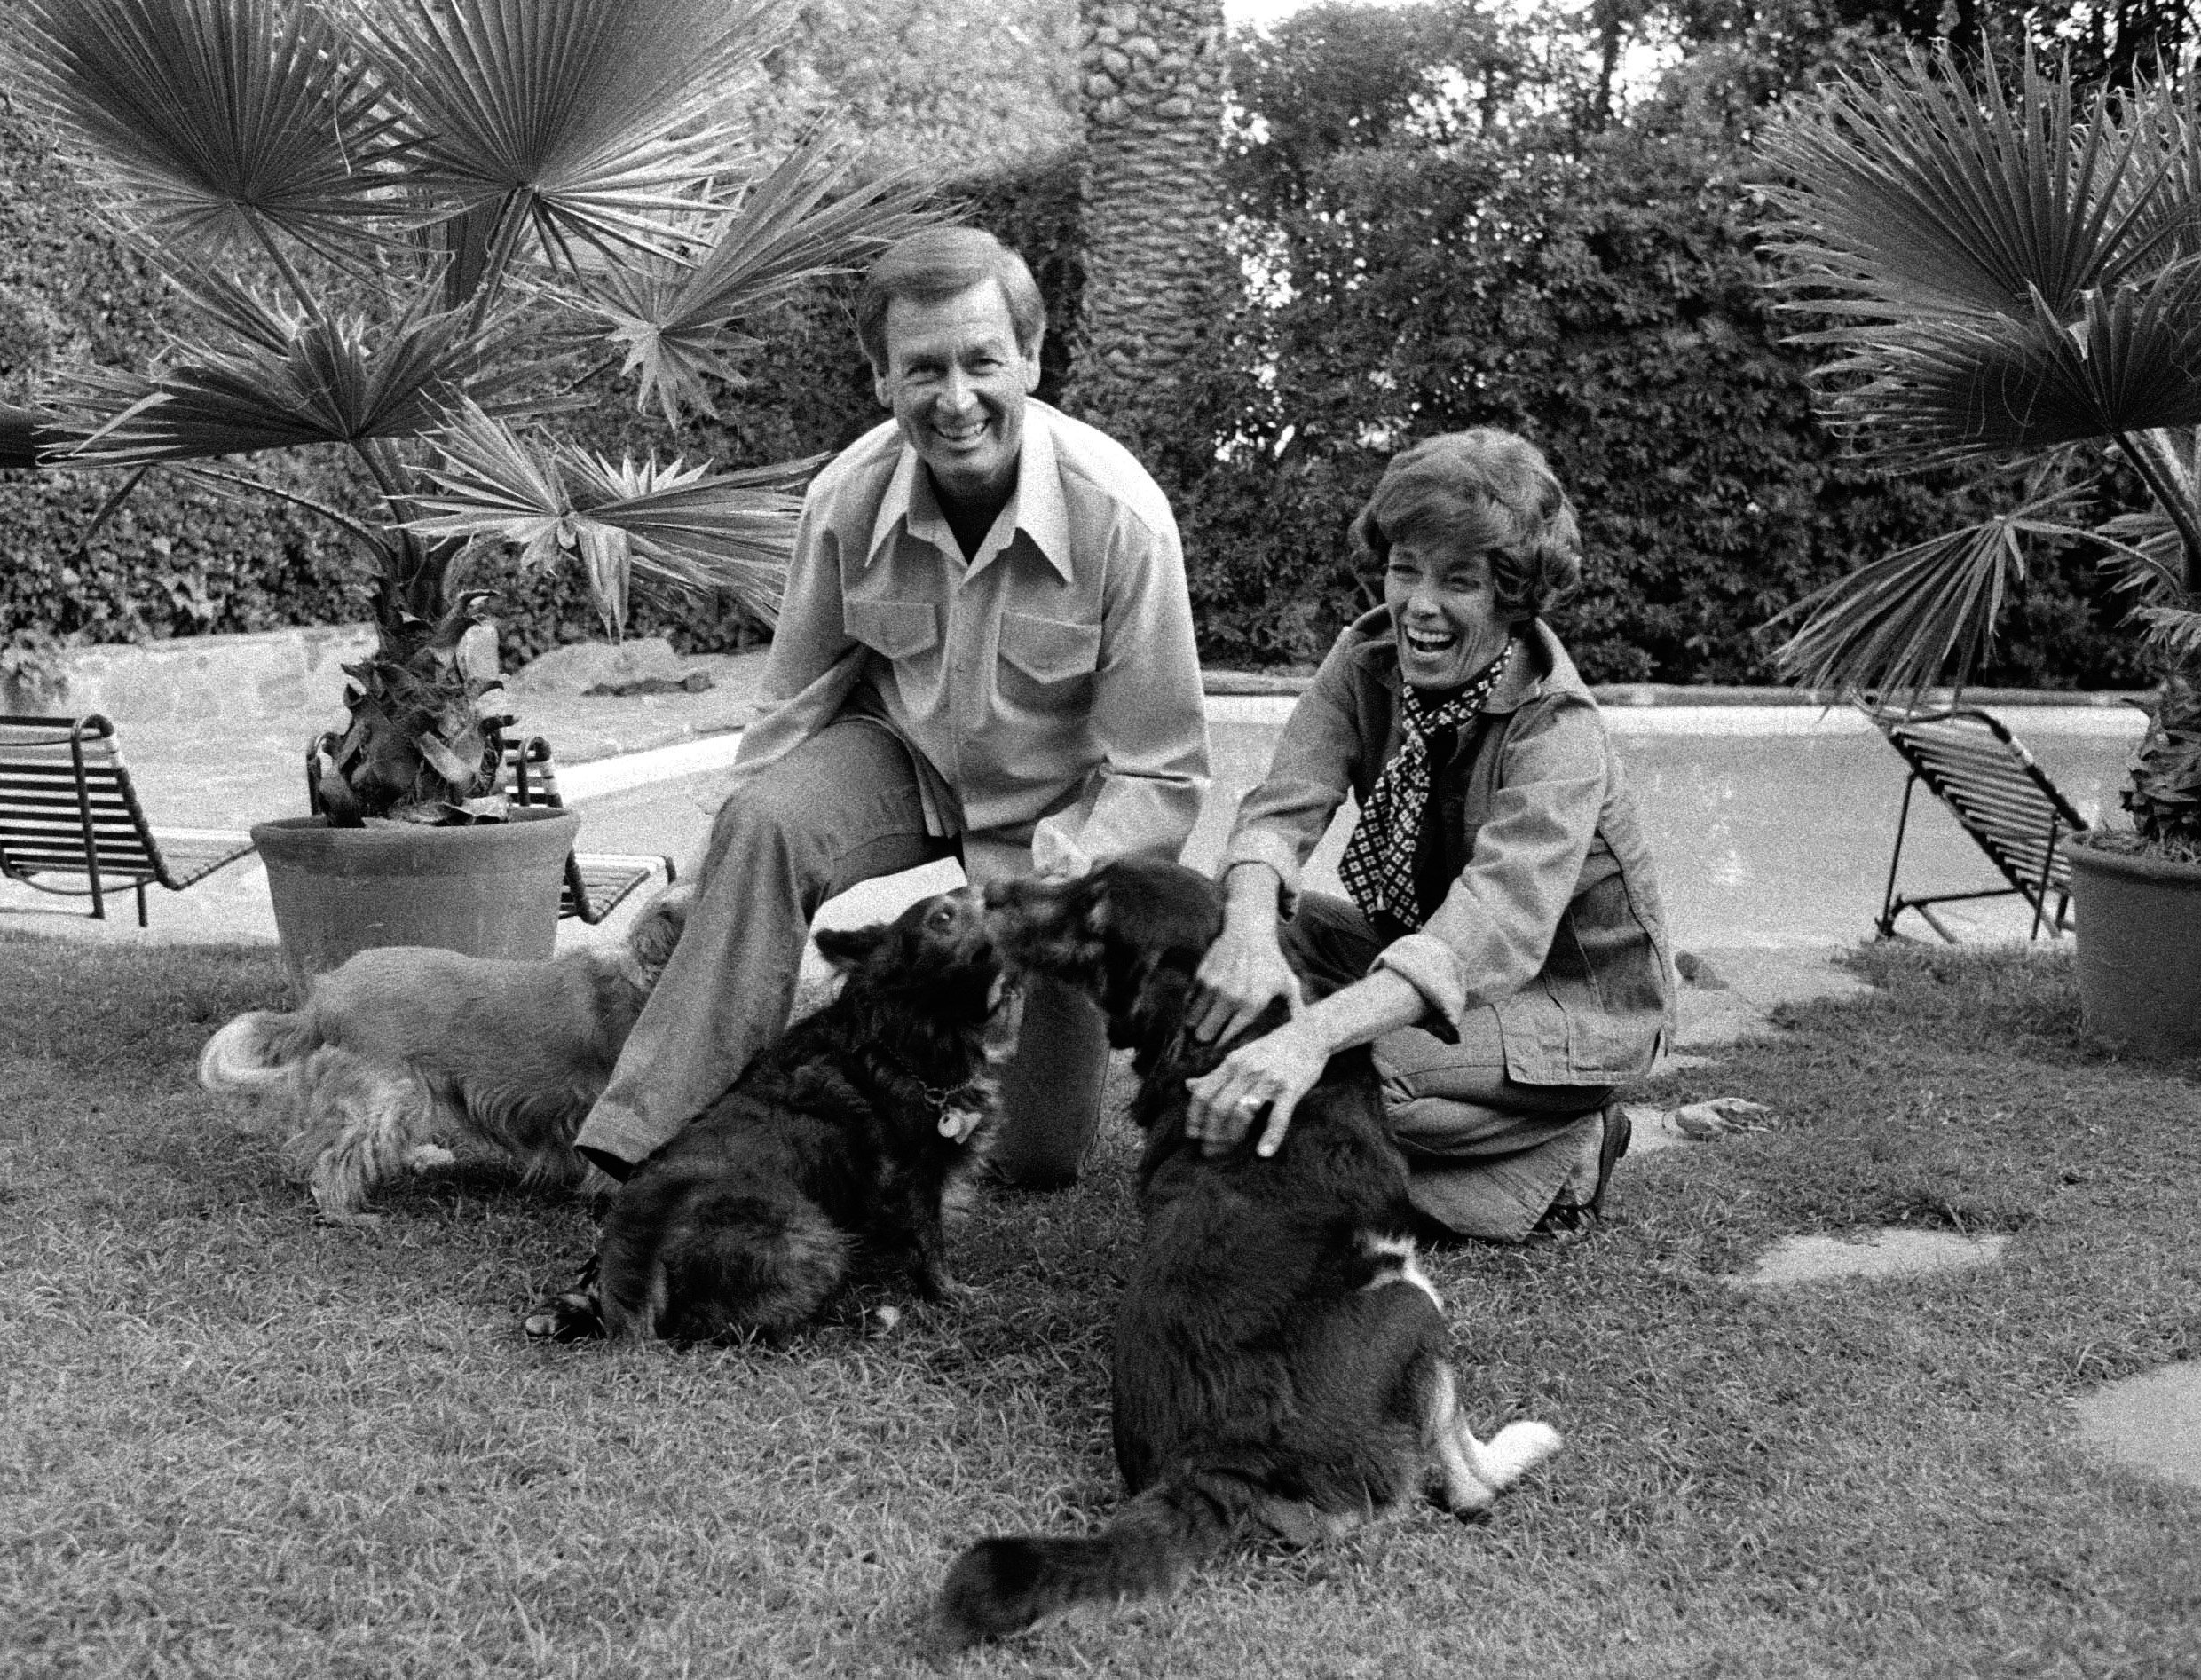 Bob Barker and his wife Dorothy Jo play with three dogs in their back yard, on November 4, 1977 | Source: Getty Images